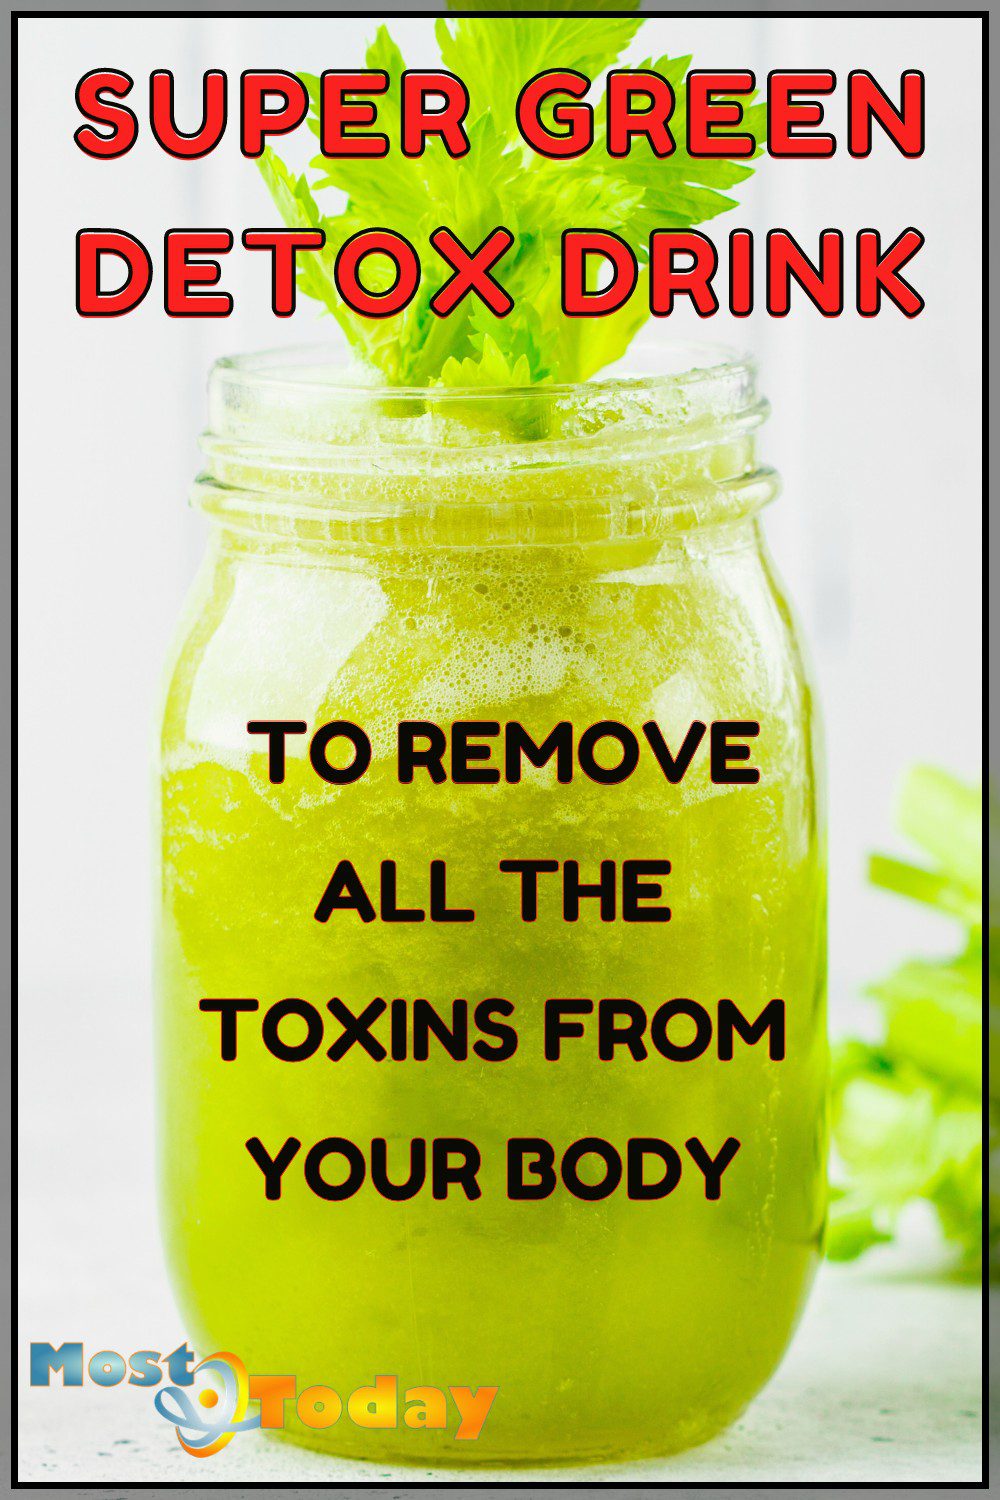 Green Detox Drink The Complete Guide To Remove All The Toxins From Your Body